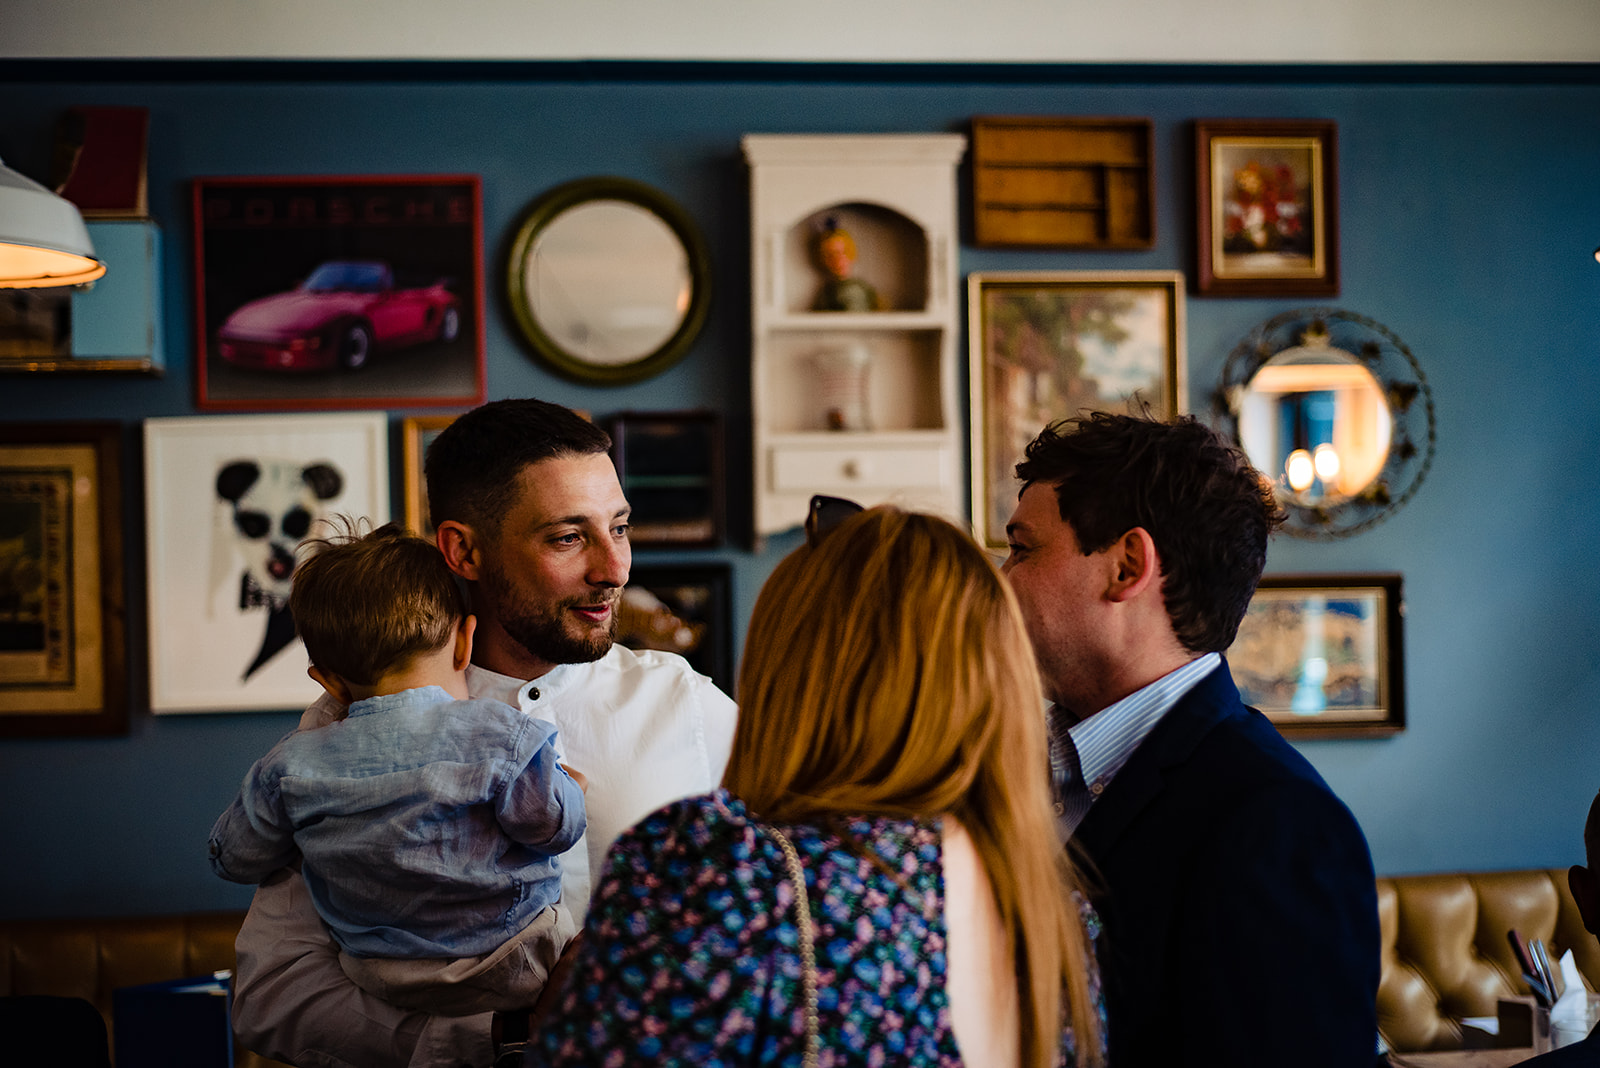 The groom holding his son and chatting with his guests.